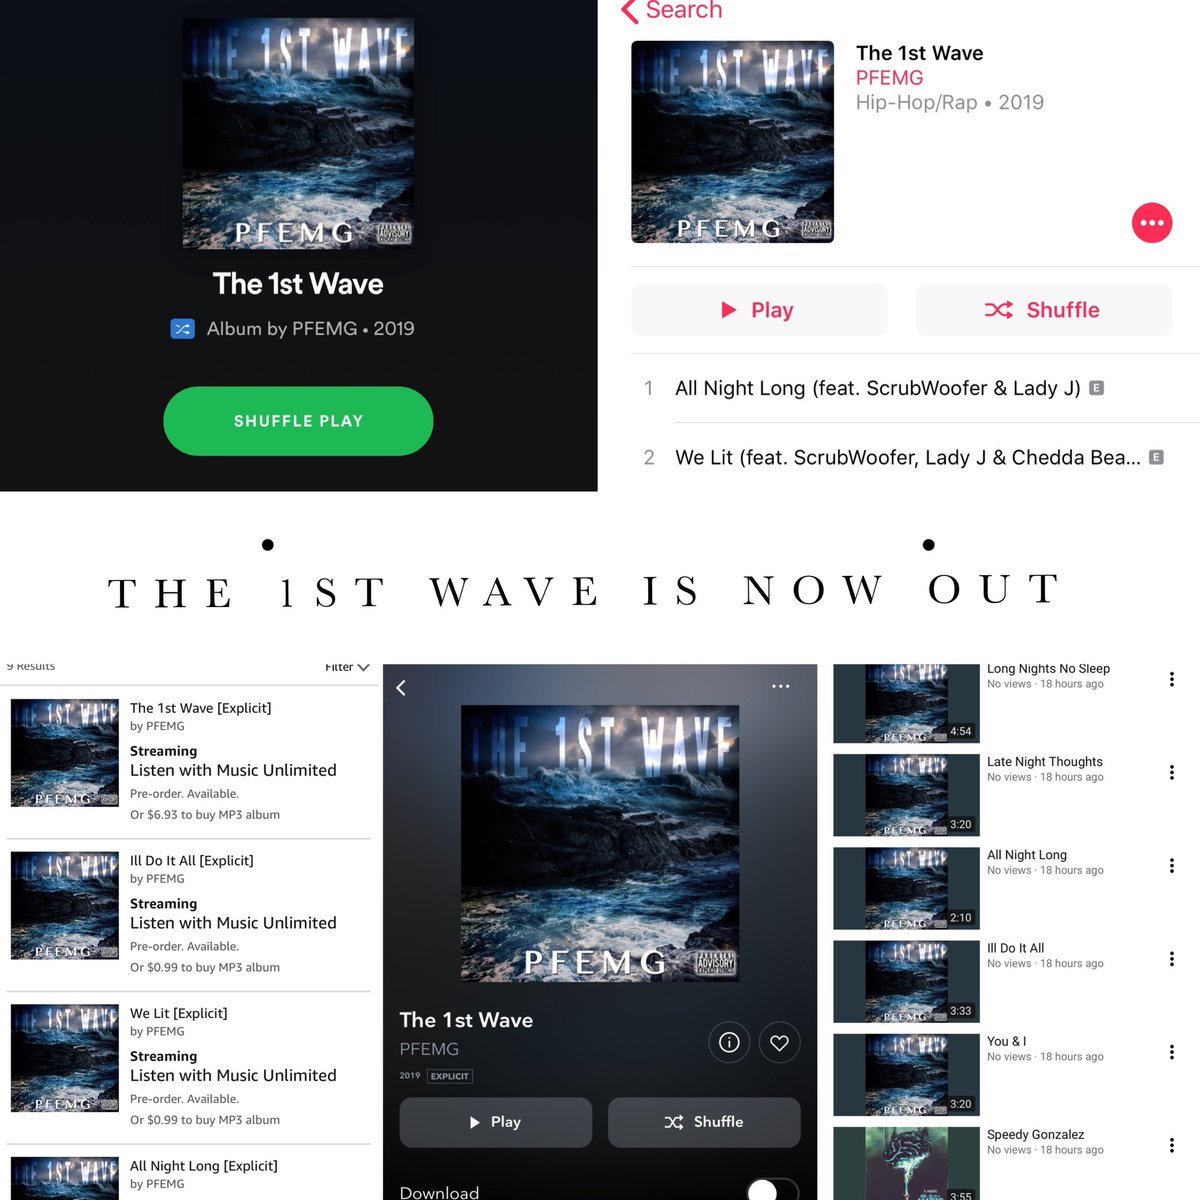 The 1st Wave PFEMG Is now out on all major platforms. There’s no excuse. Get to downloading. #musicoutnow #musicoutnowalldigitaloutlets #musicoutnowisfire #musicoutnowon #music #downloadnow #album #mixtape #youtube #spotify #tidal #amazonmusic #googleplaymusic #iheardradio